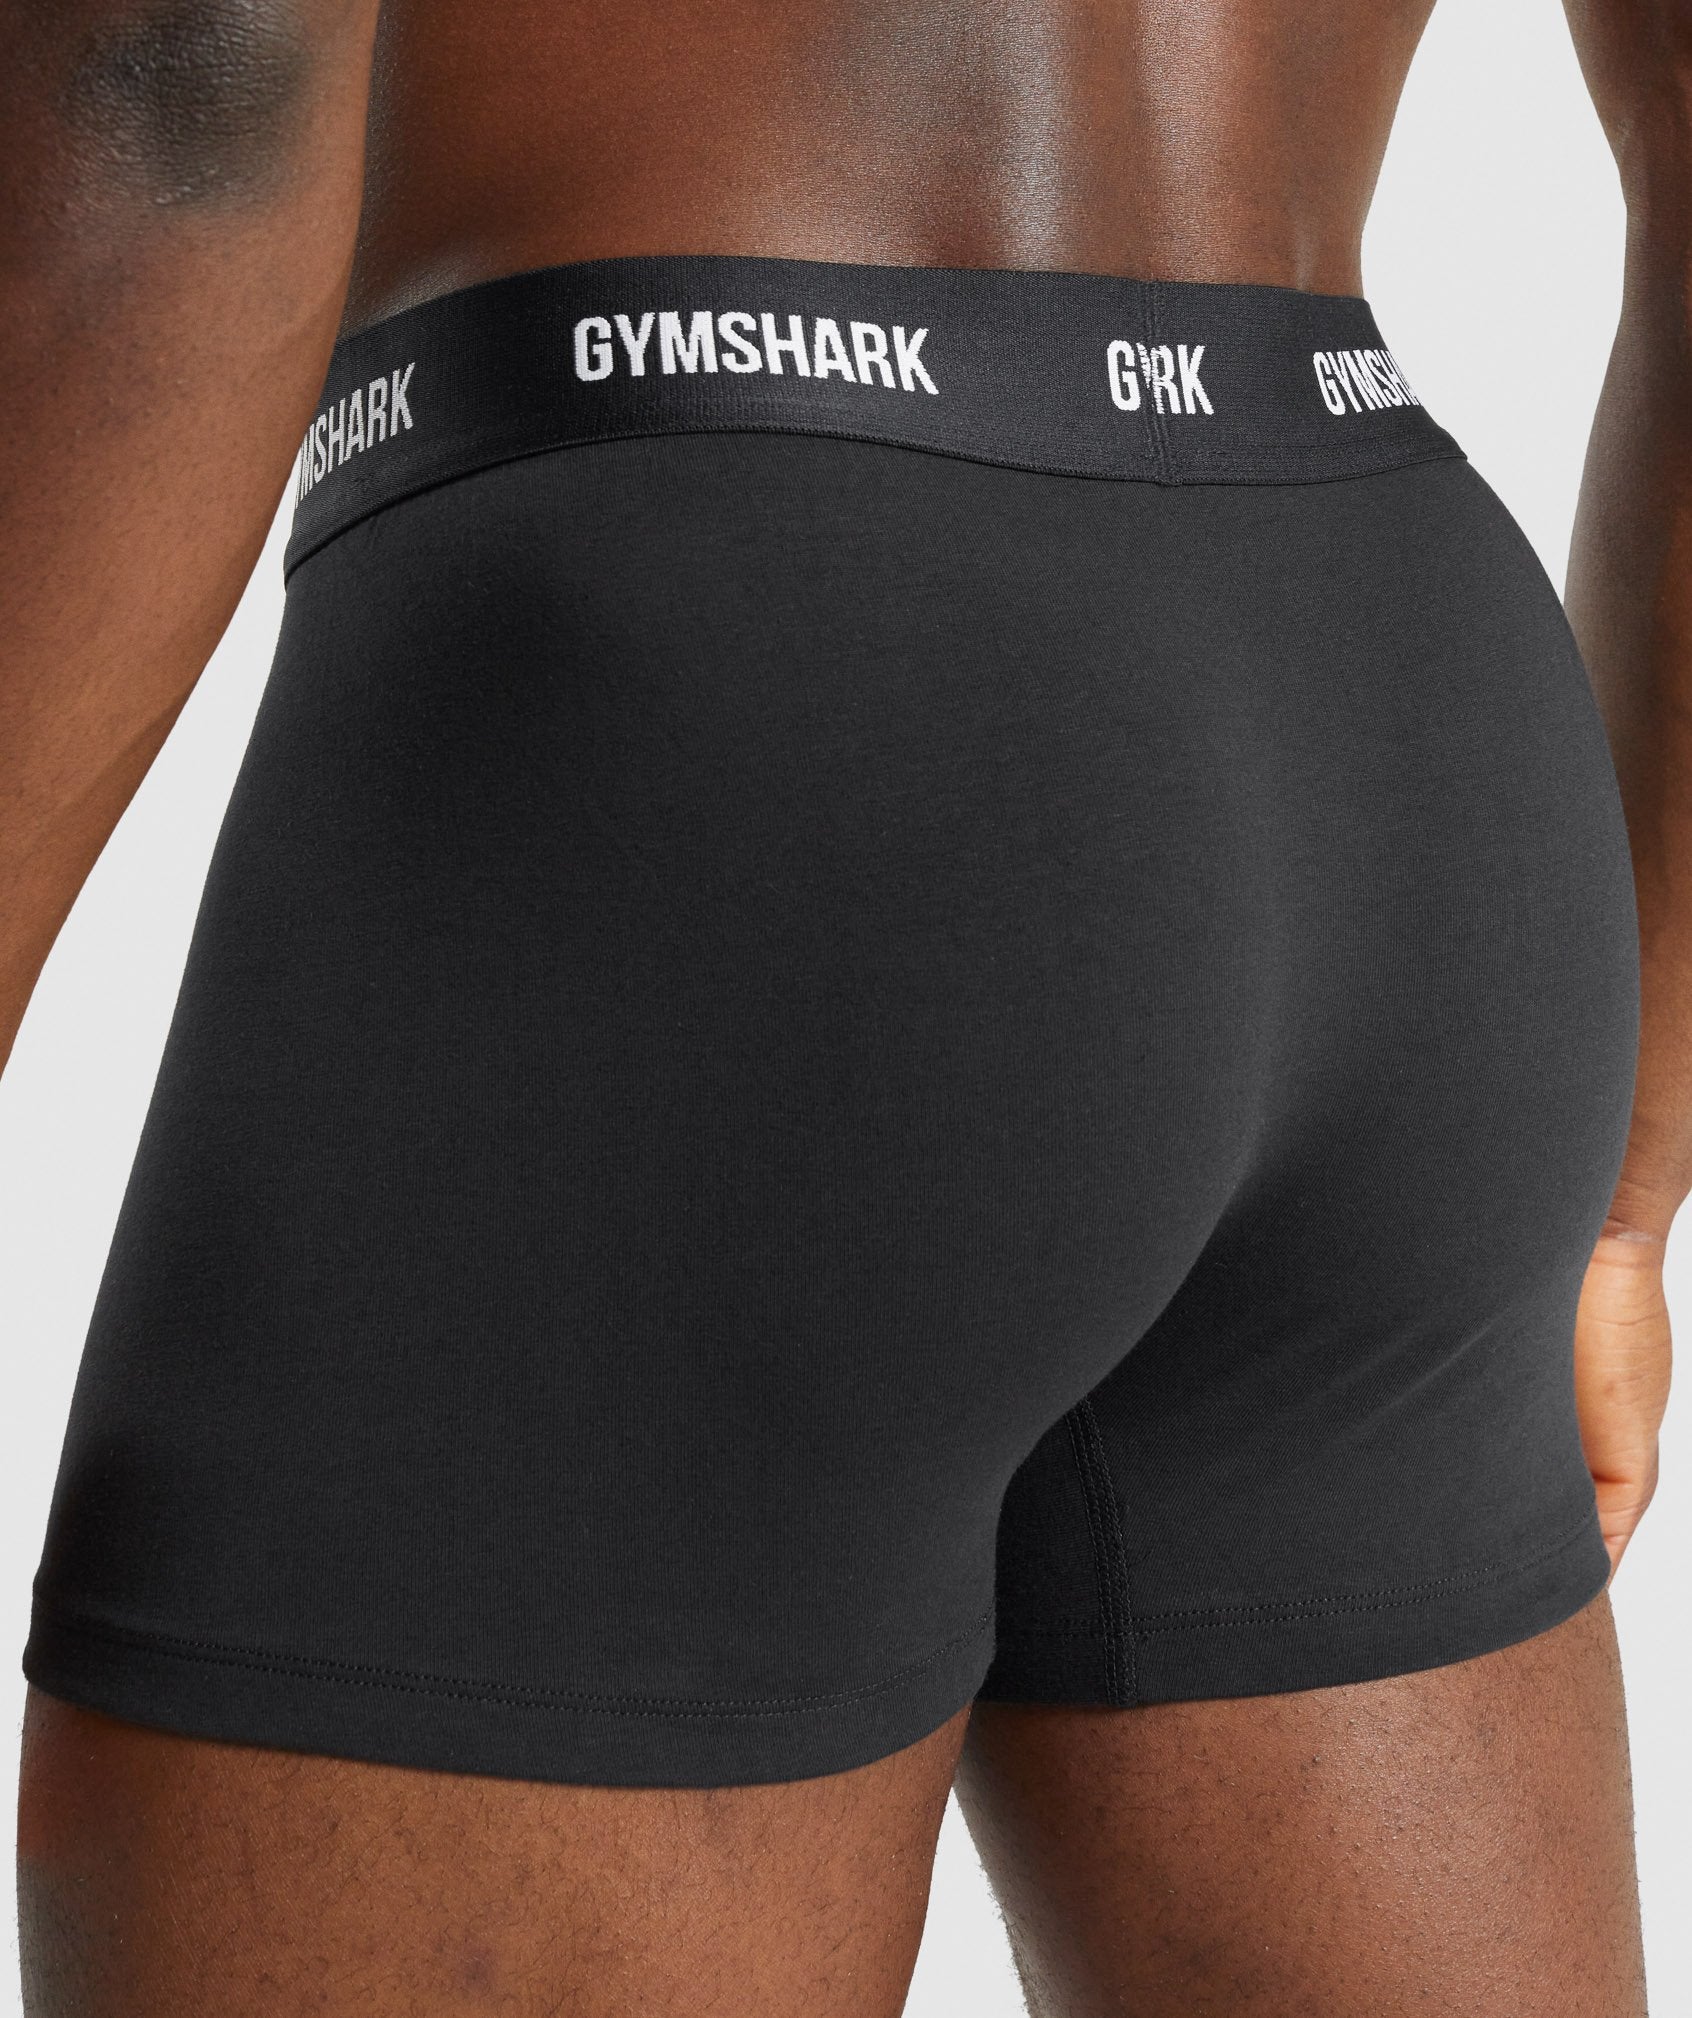 Gymshark on X: The BRAND NEW Gymshark underwear colours are NOW